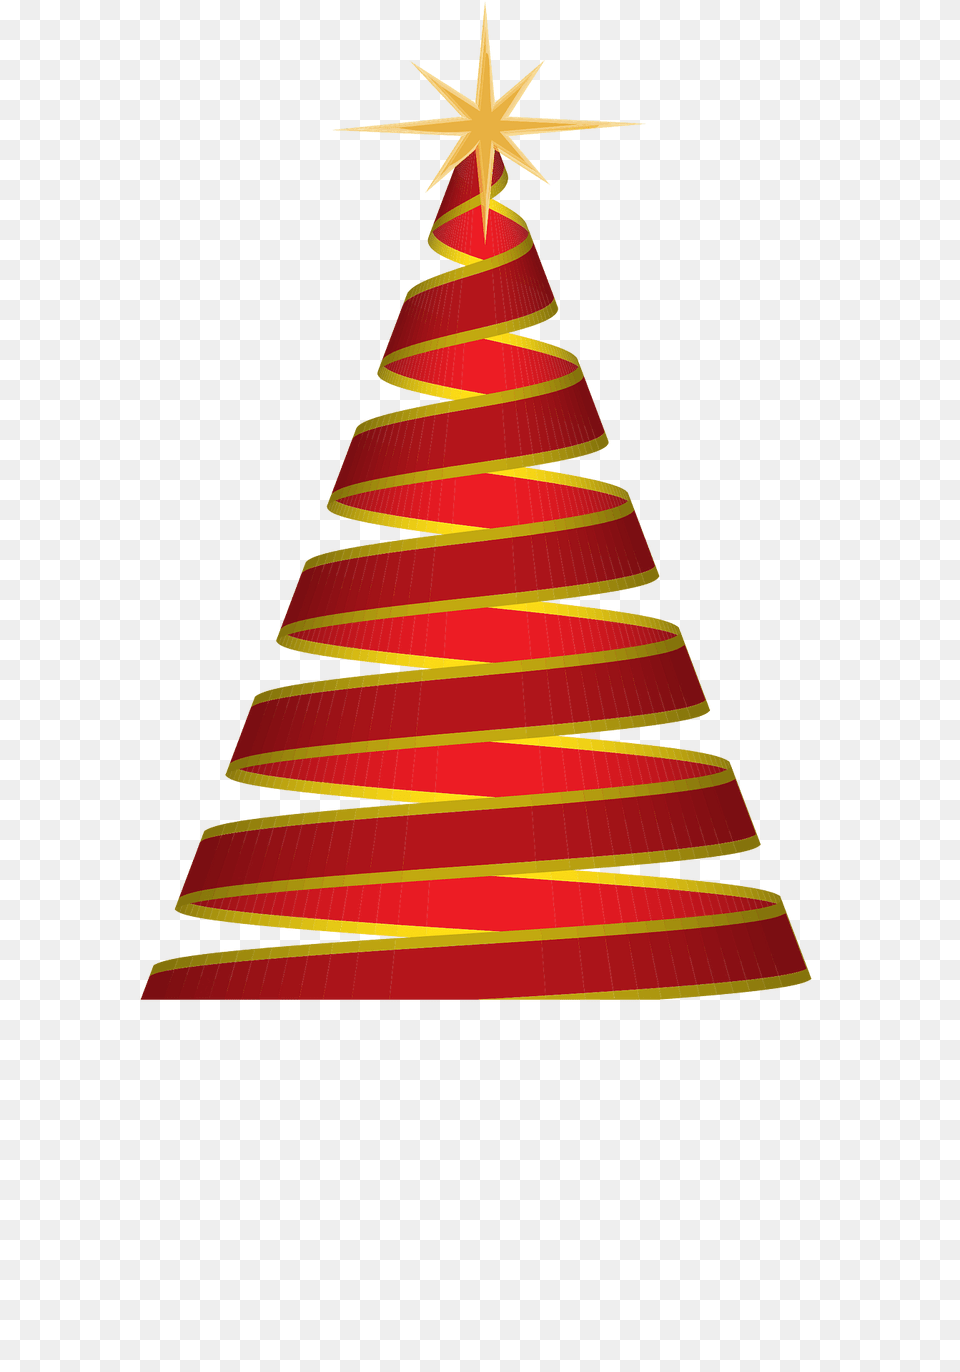 Christmas Tree Clipart, Rocket, Weapon, Christmas Decorations, Festival Png